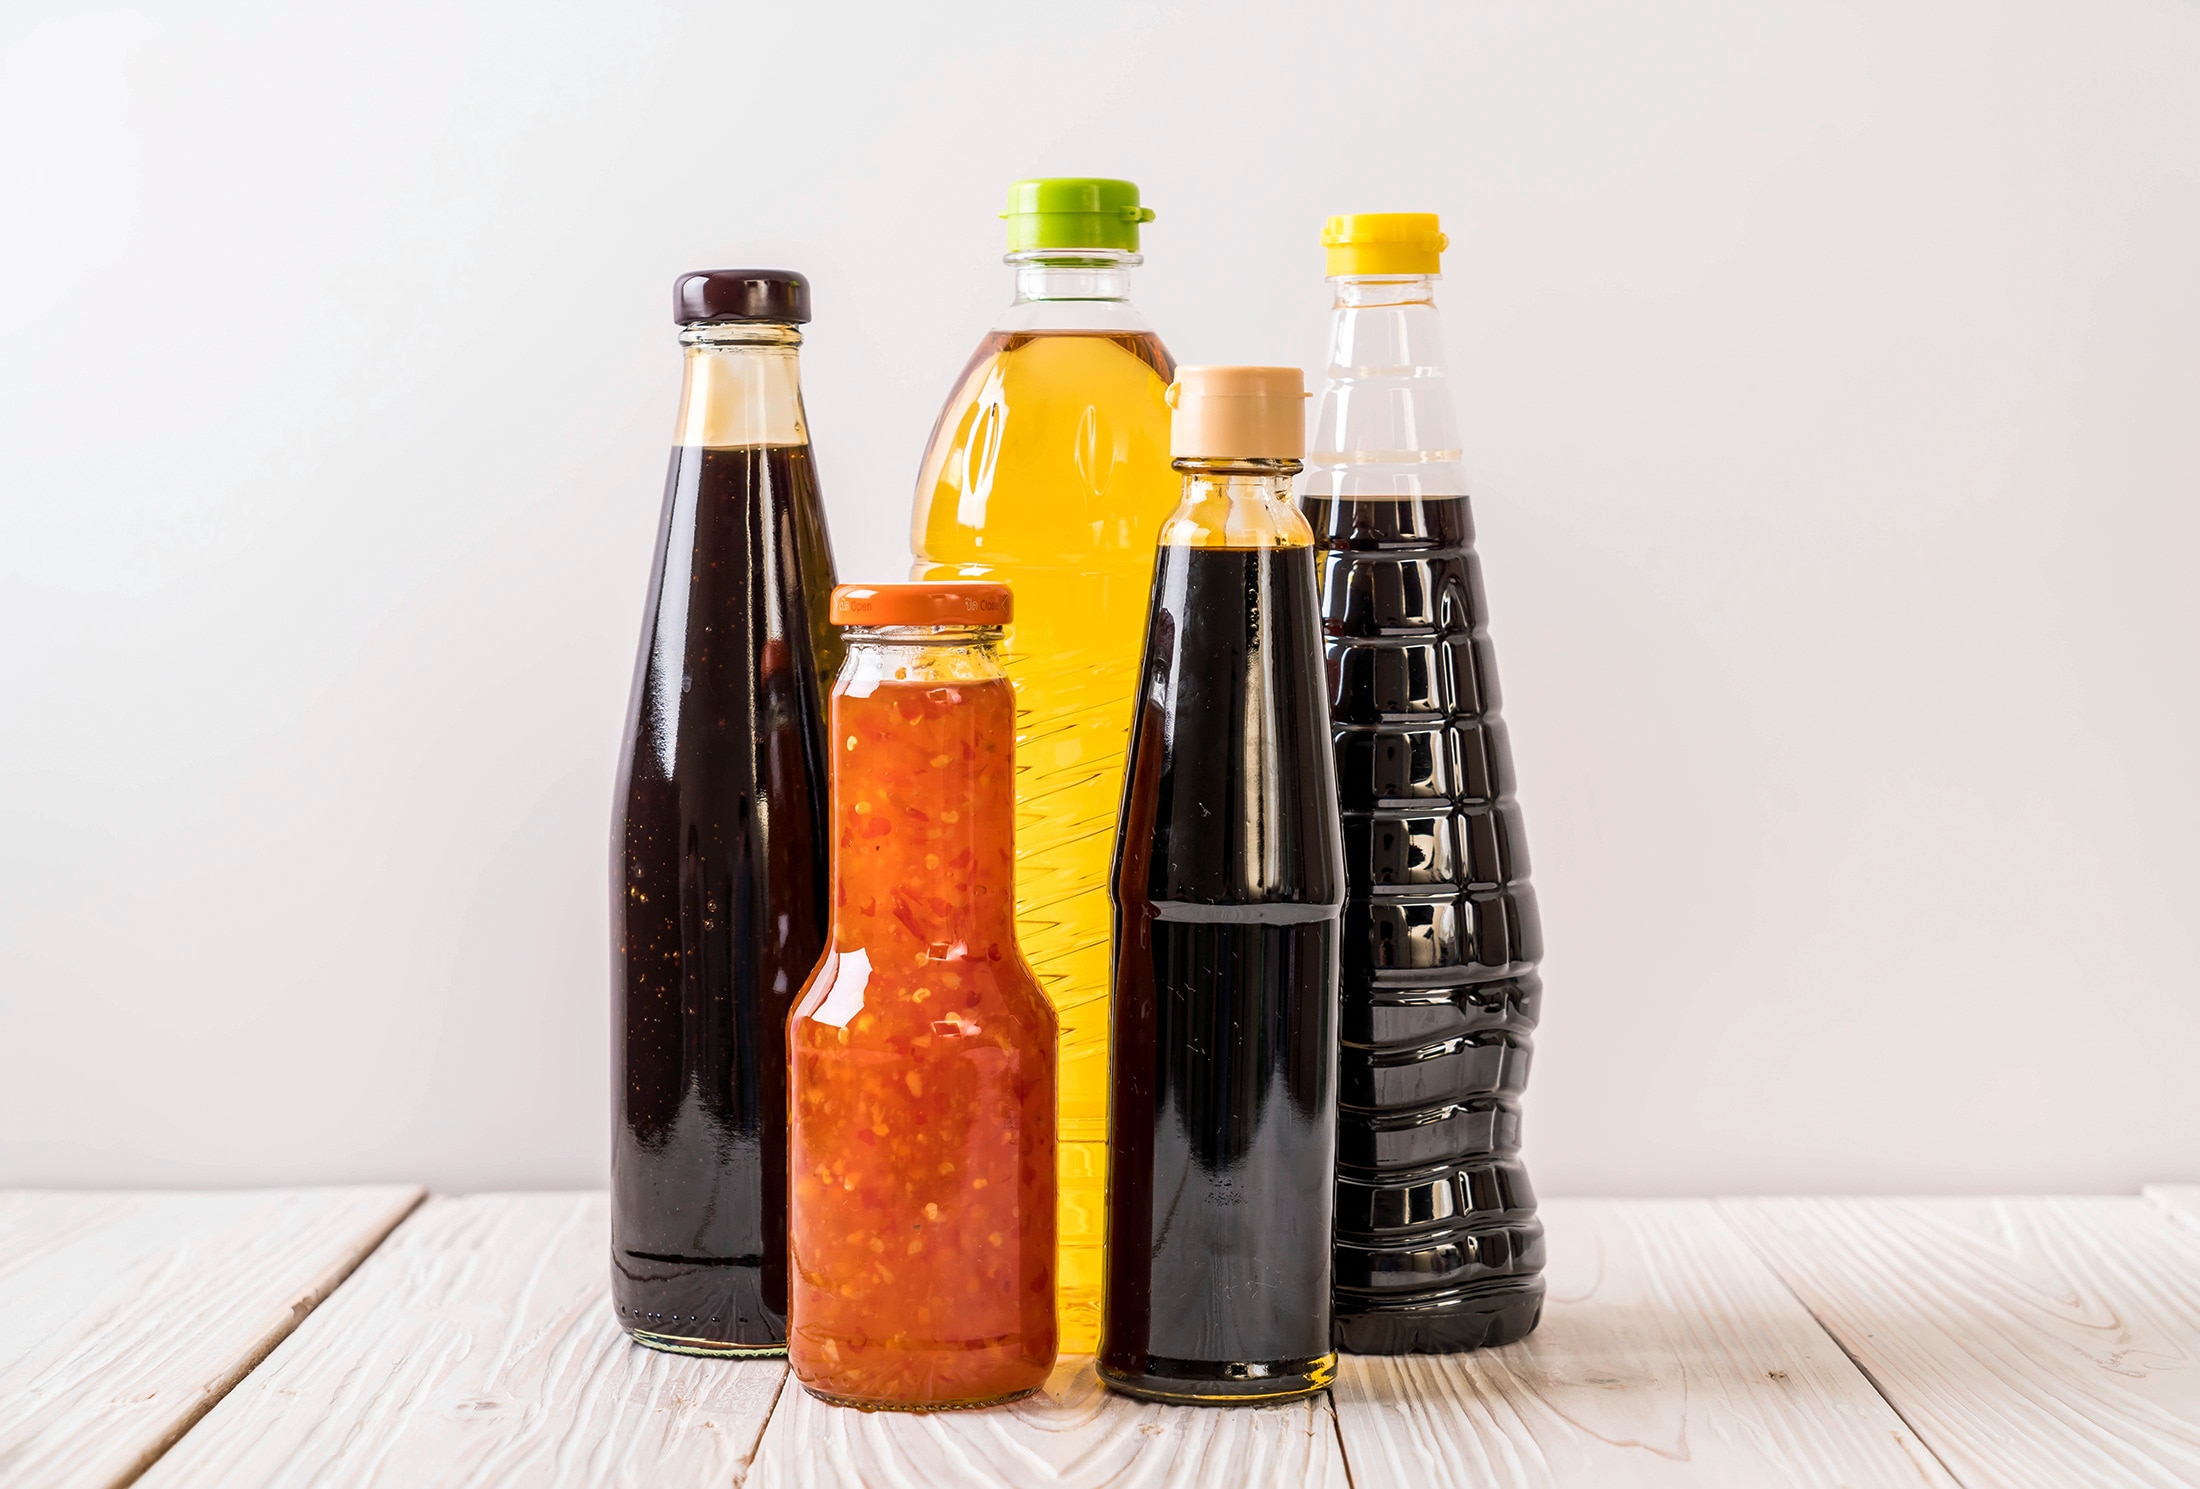 A selection of bottled condiments on a light wooden countertop